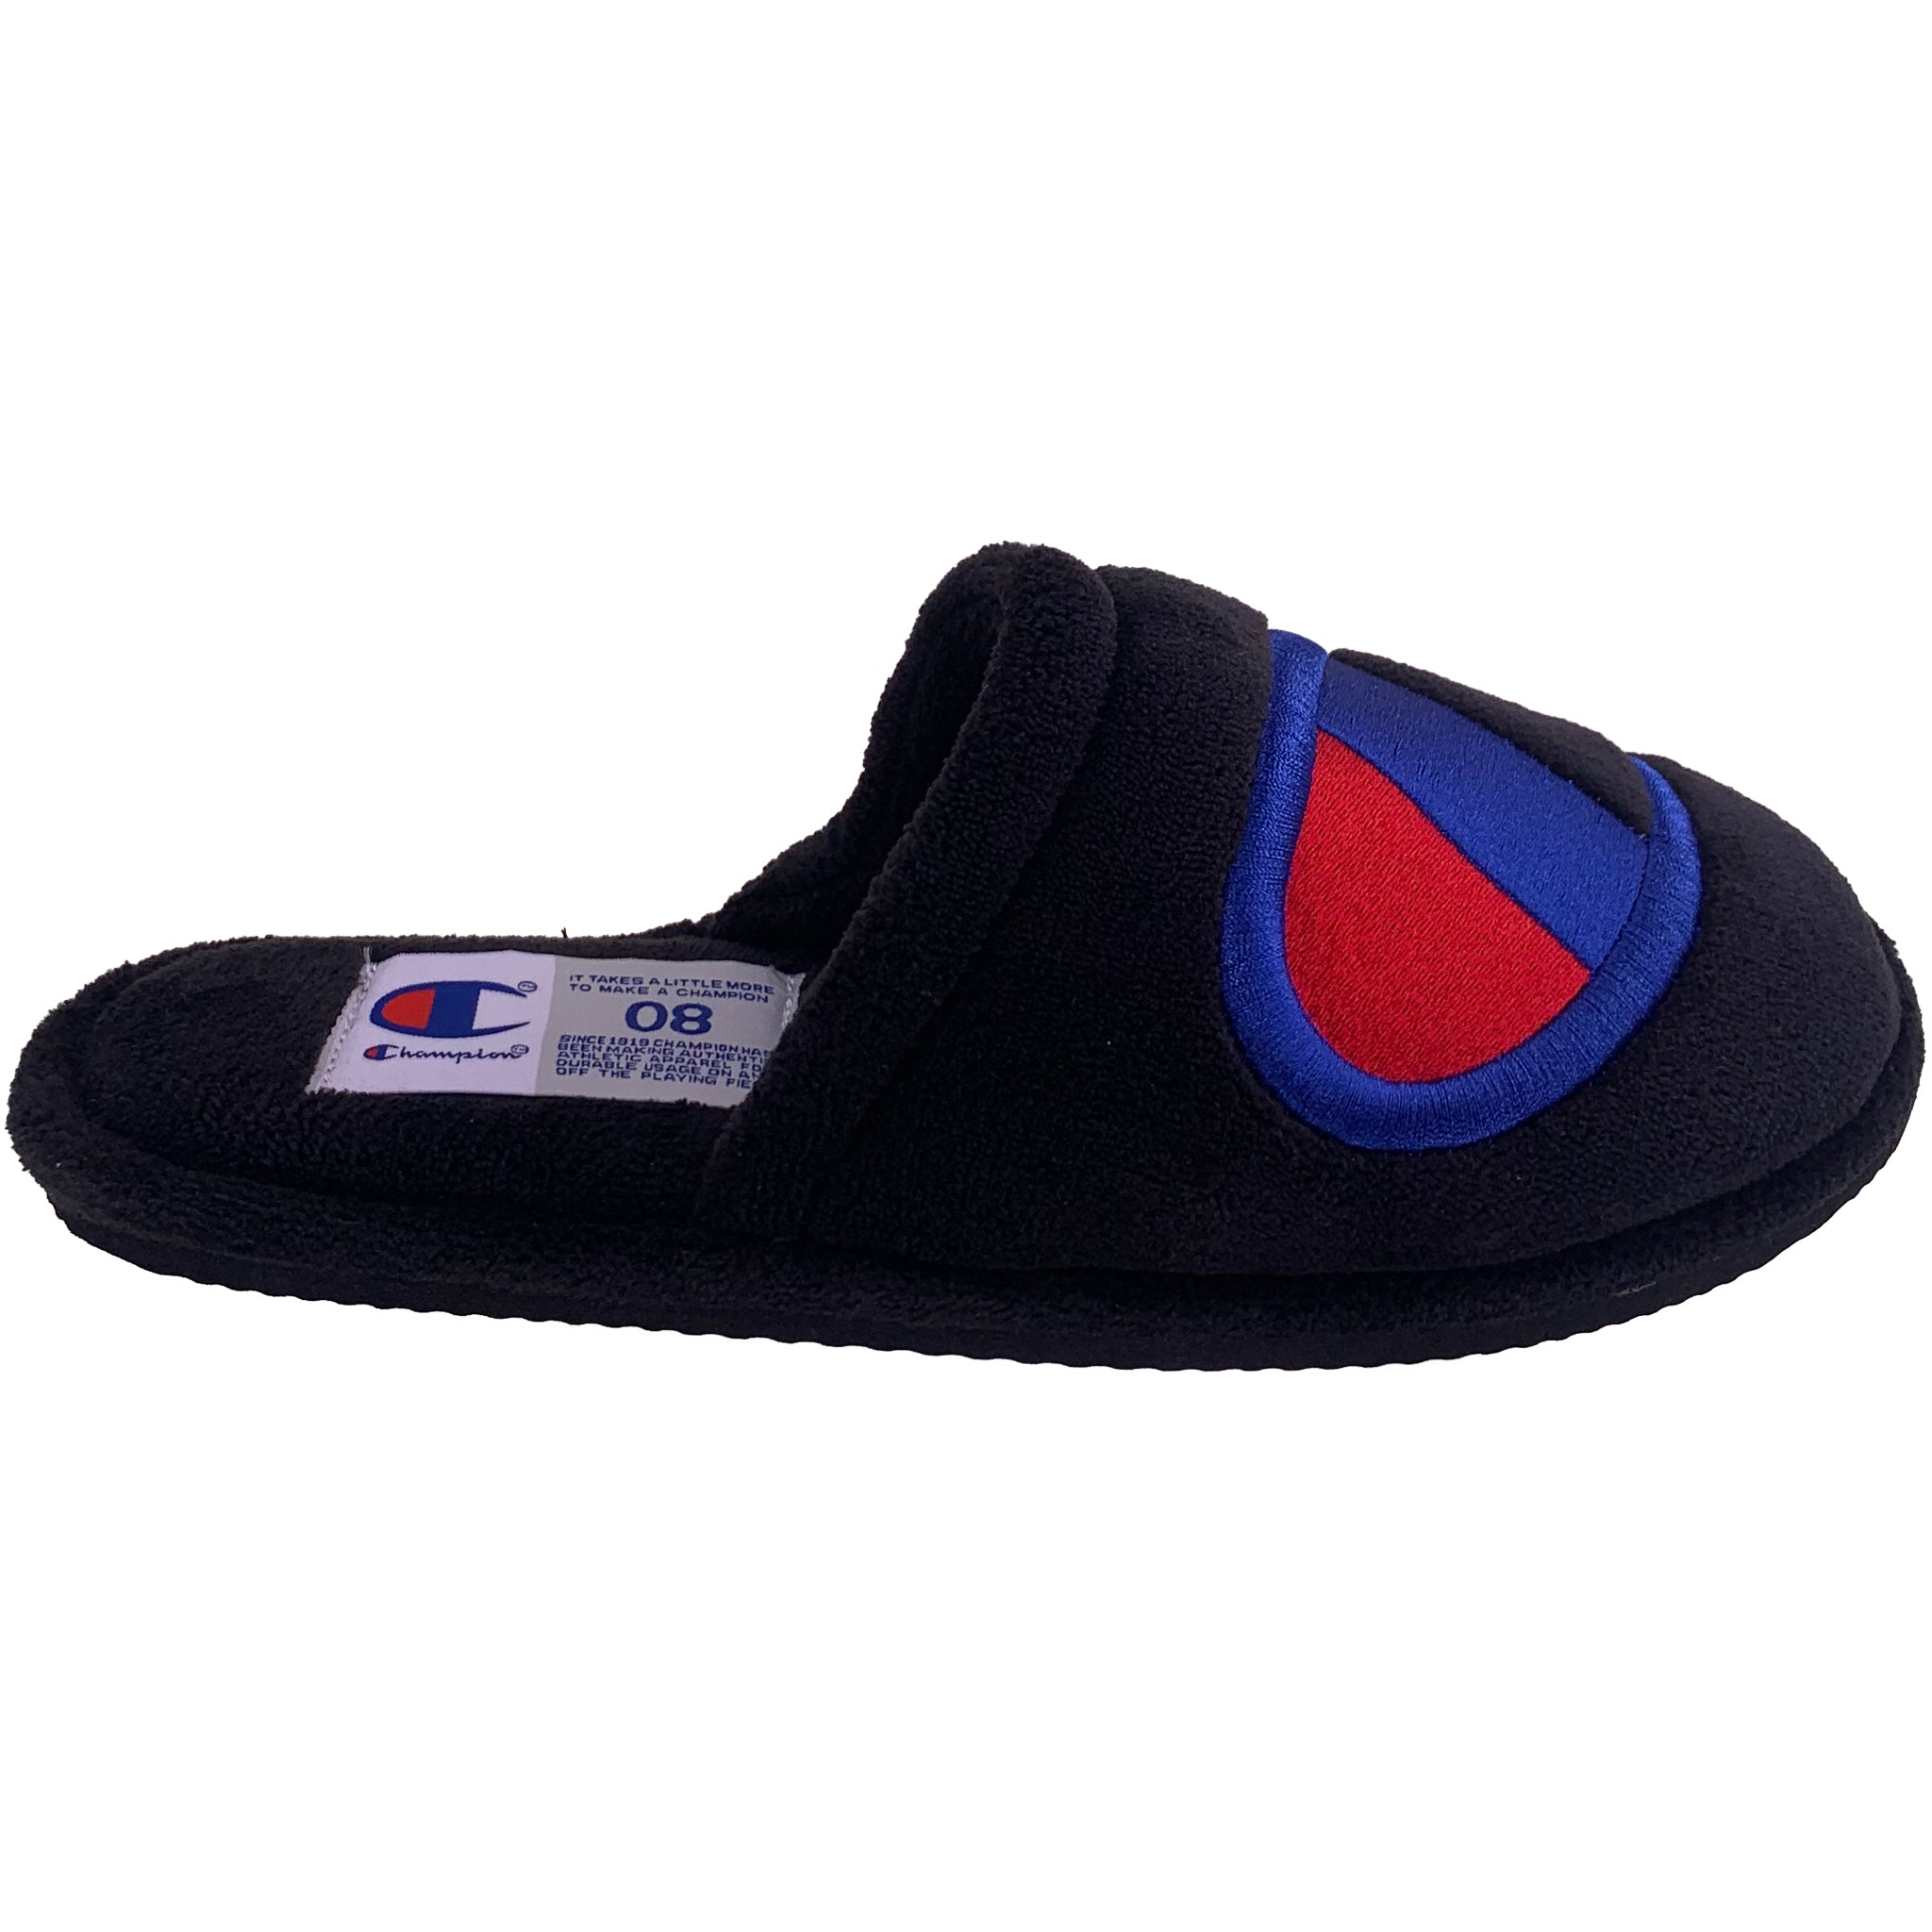 Champion Men's The Sleepover Cozy Fuzzy Bedroom Slippers Slides – That Store and More